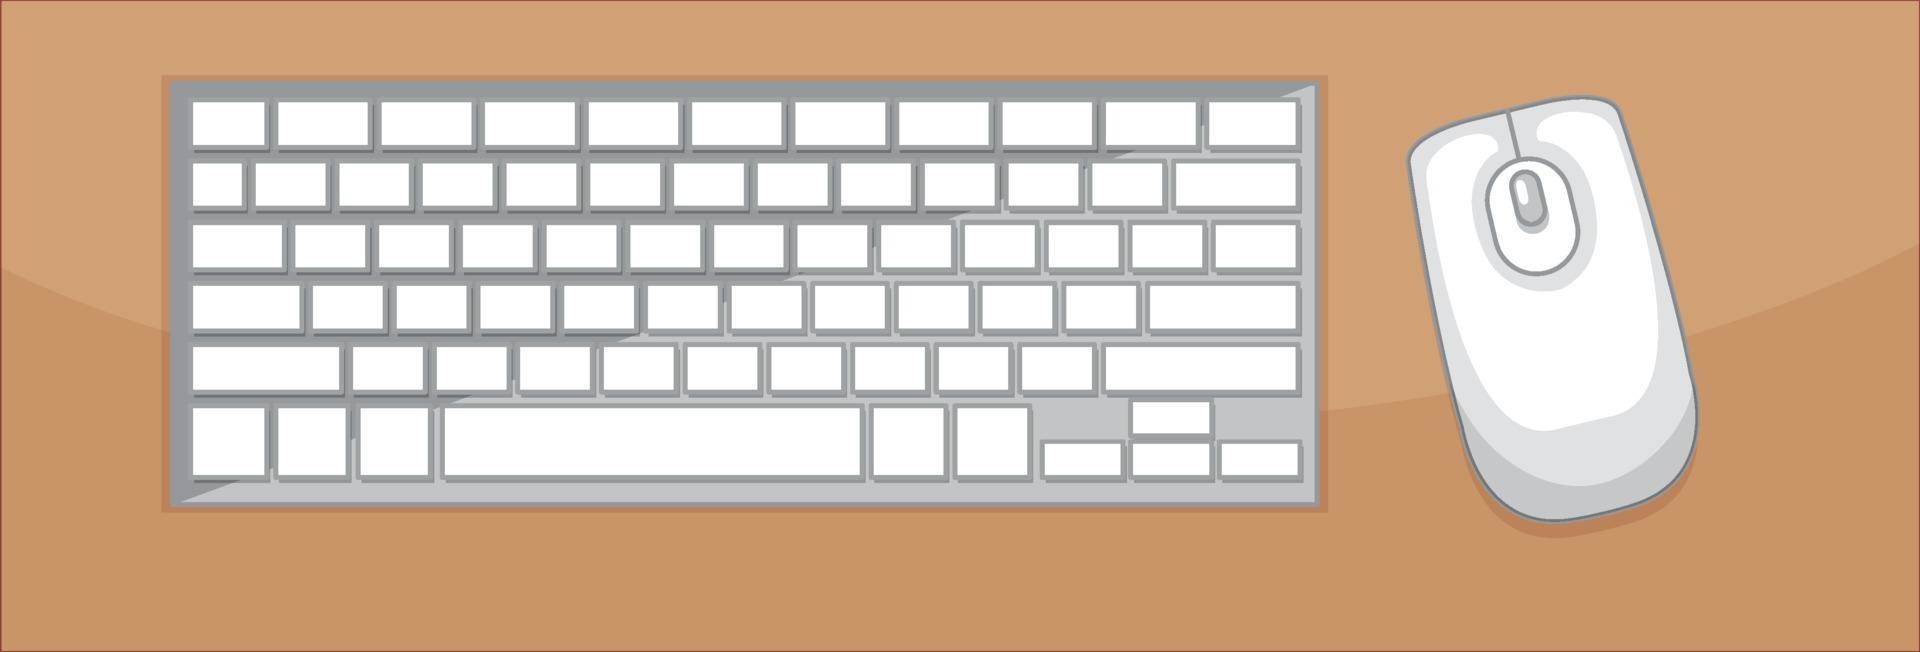 Top view of keyboard and mouse on the table vector